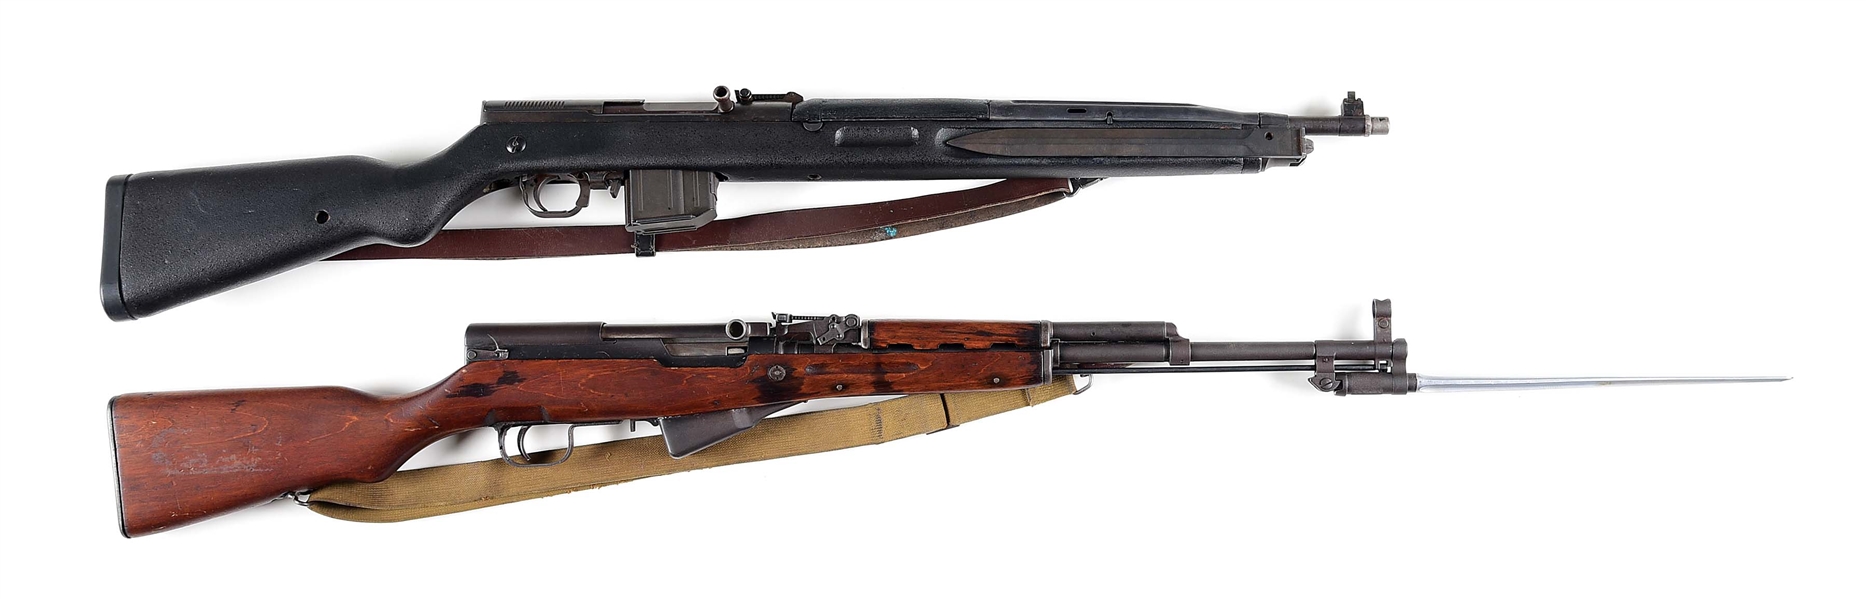 (C) LOT OF 2: CZ VZ-52 AND CHINESE SKS SEMI-AUTO RIFLES